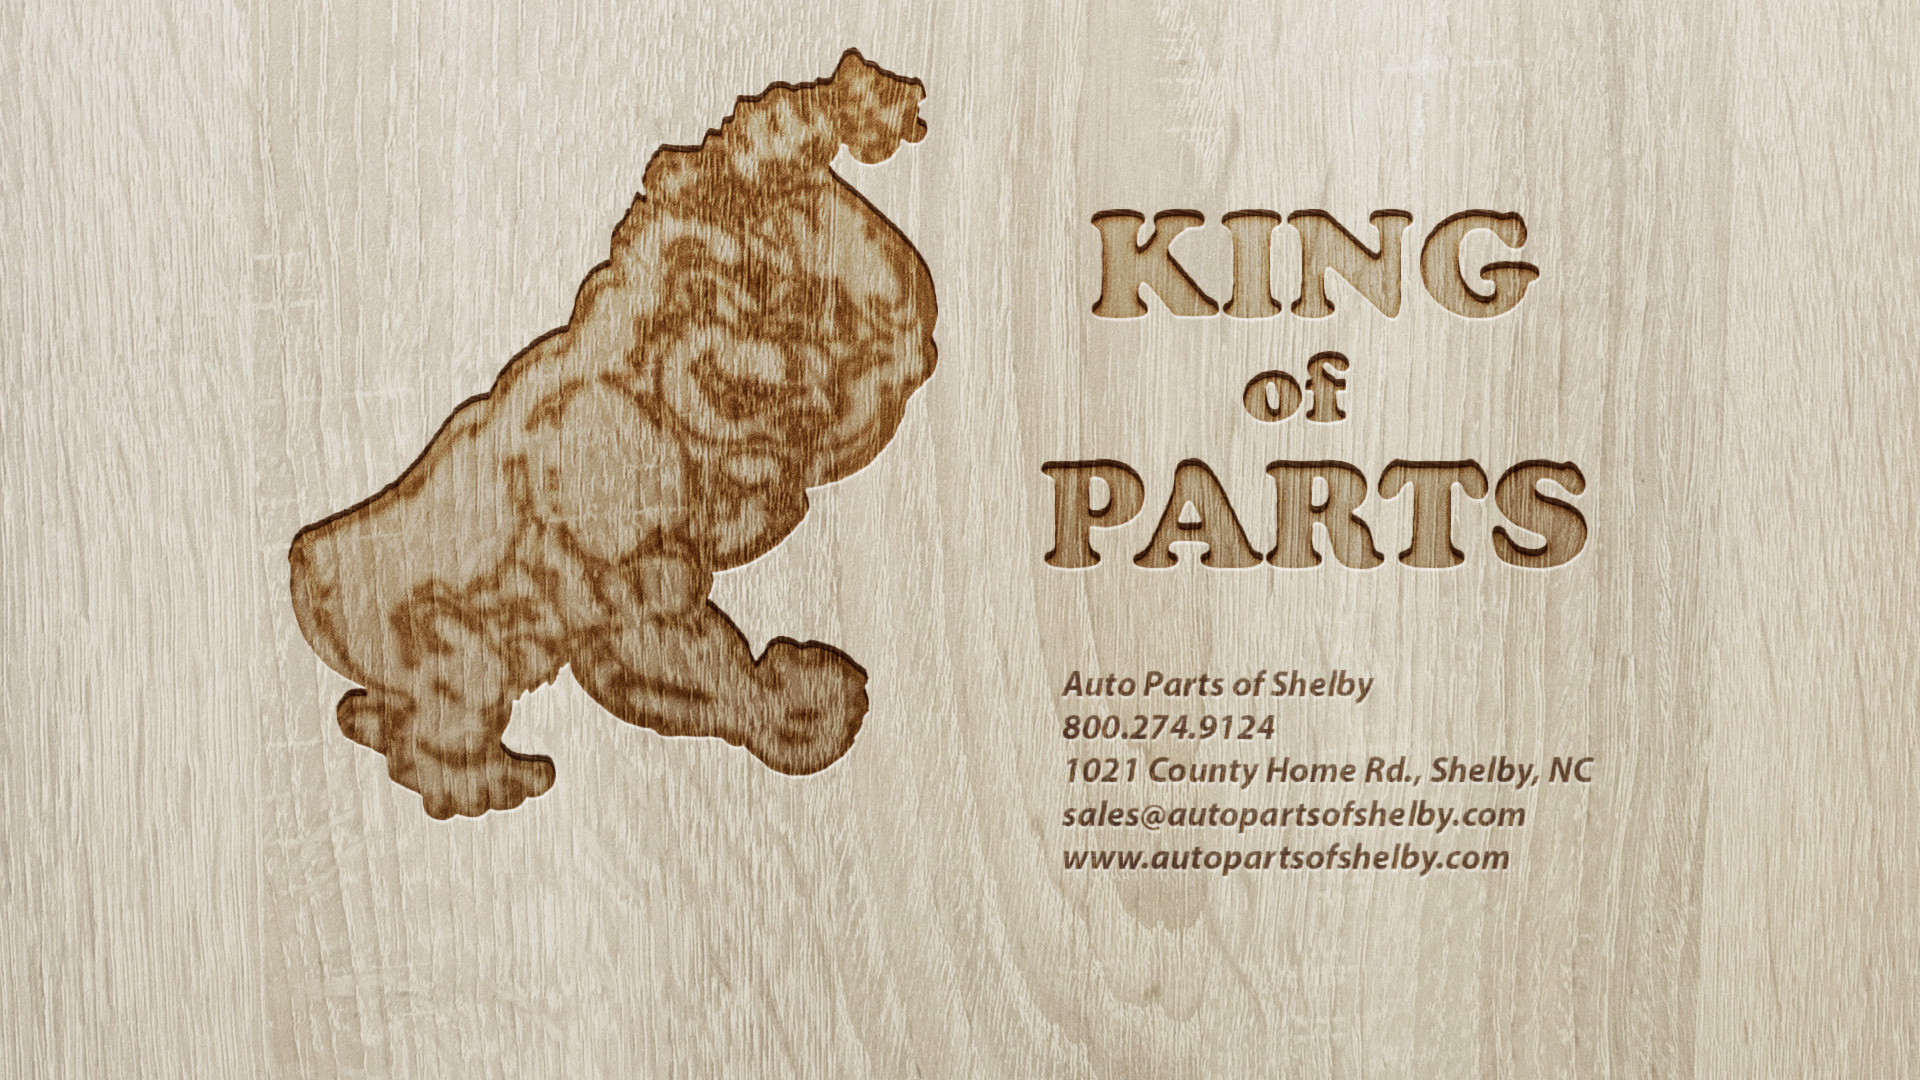 Auto Parts of Shelby Engraved Wood Desktop Wallpaper 1920 x 1080